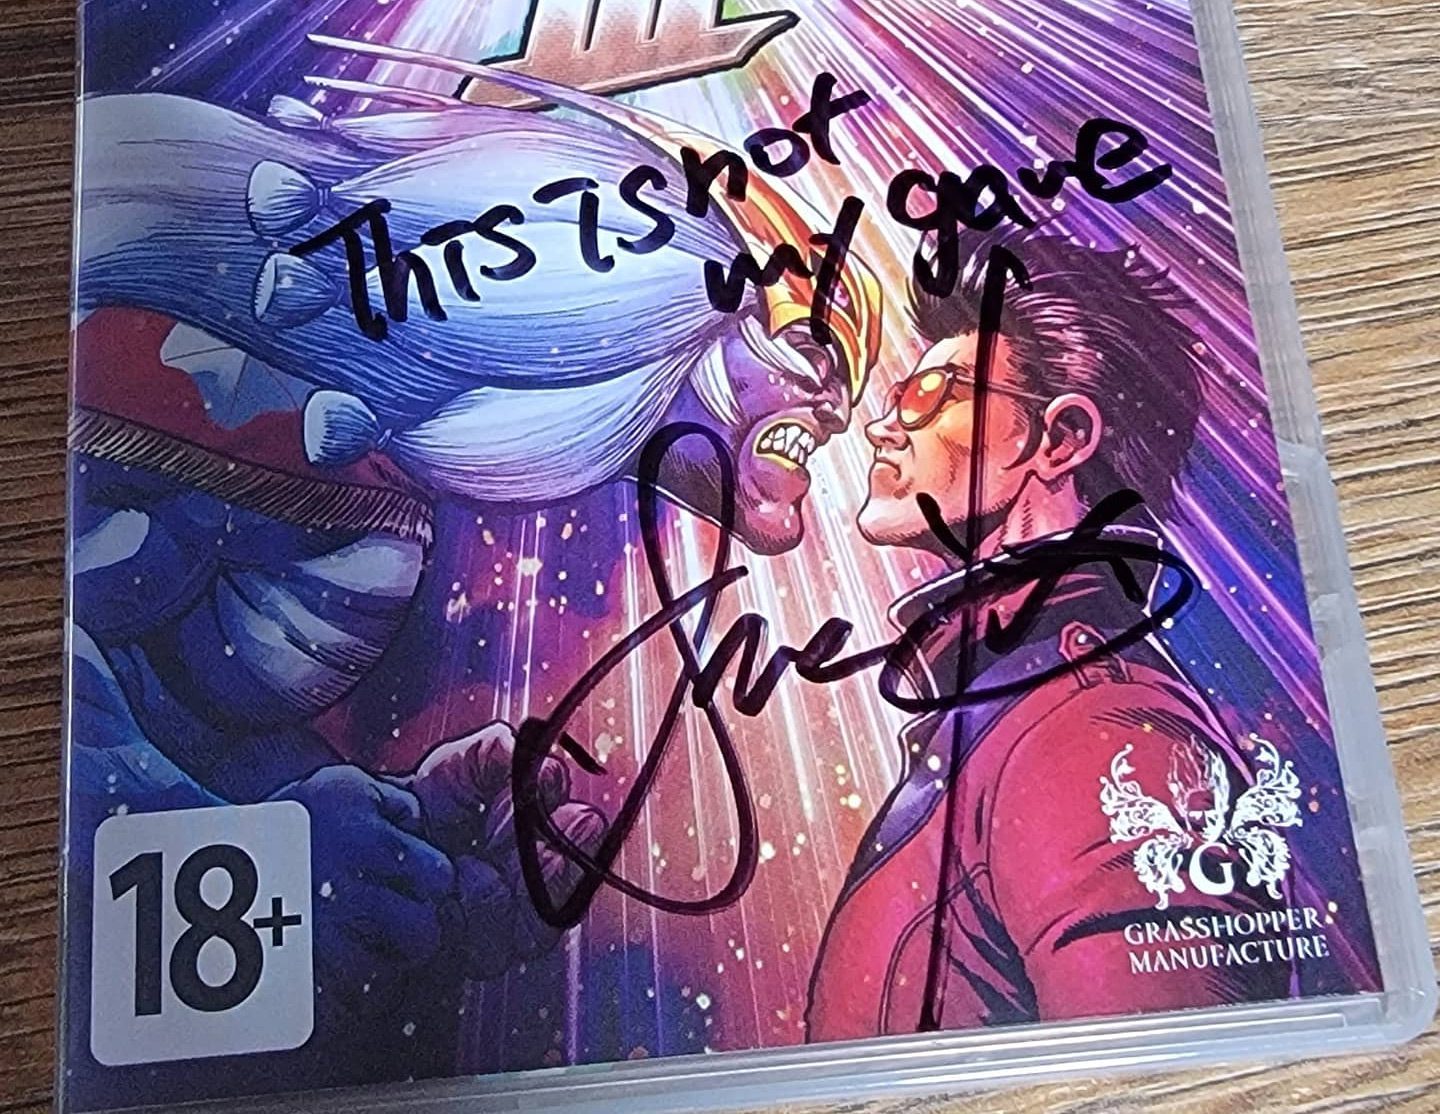 "This is not my game" Swery autograph